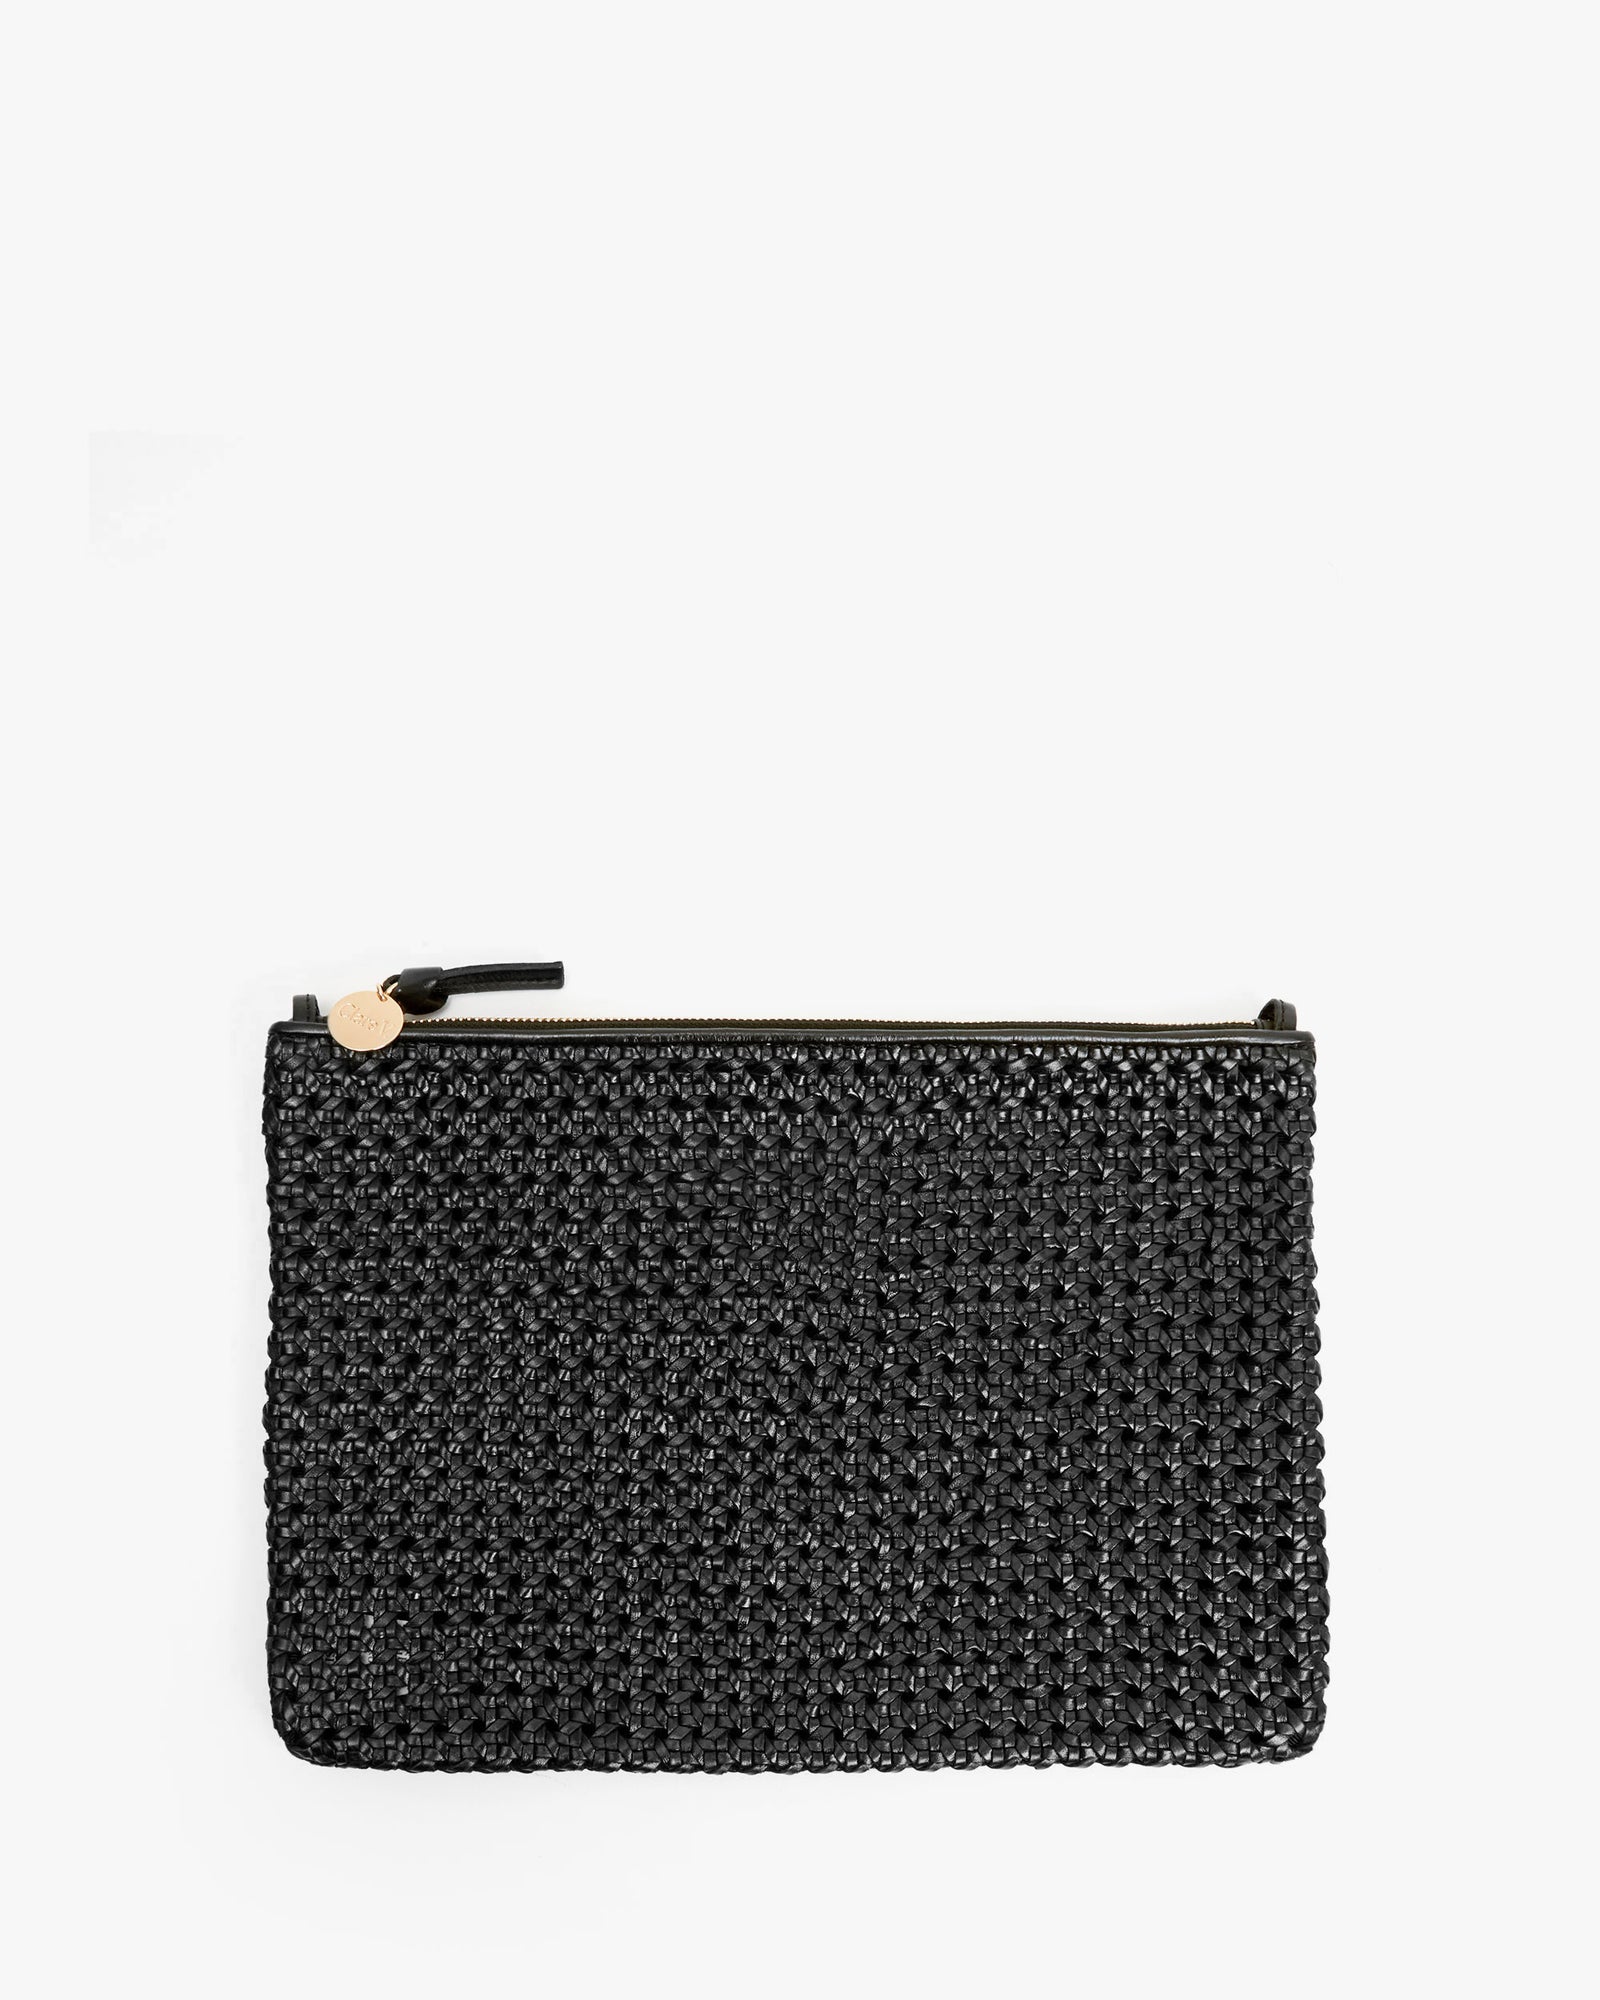 Foldover Clutch with Tabs – Clare V.